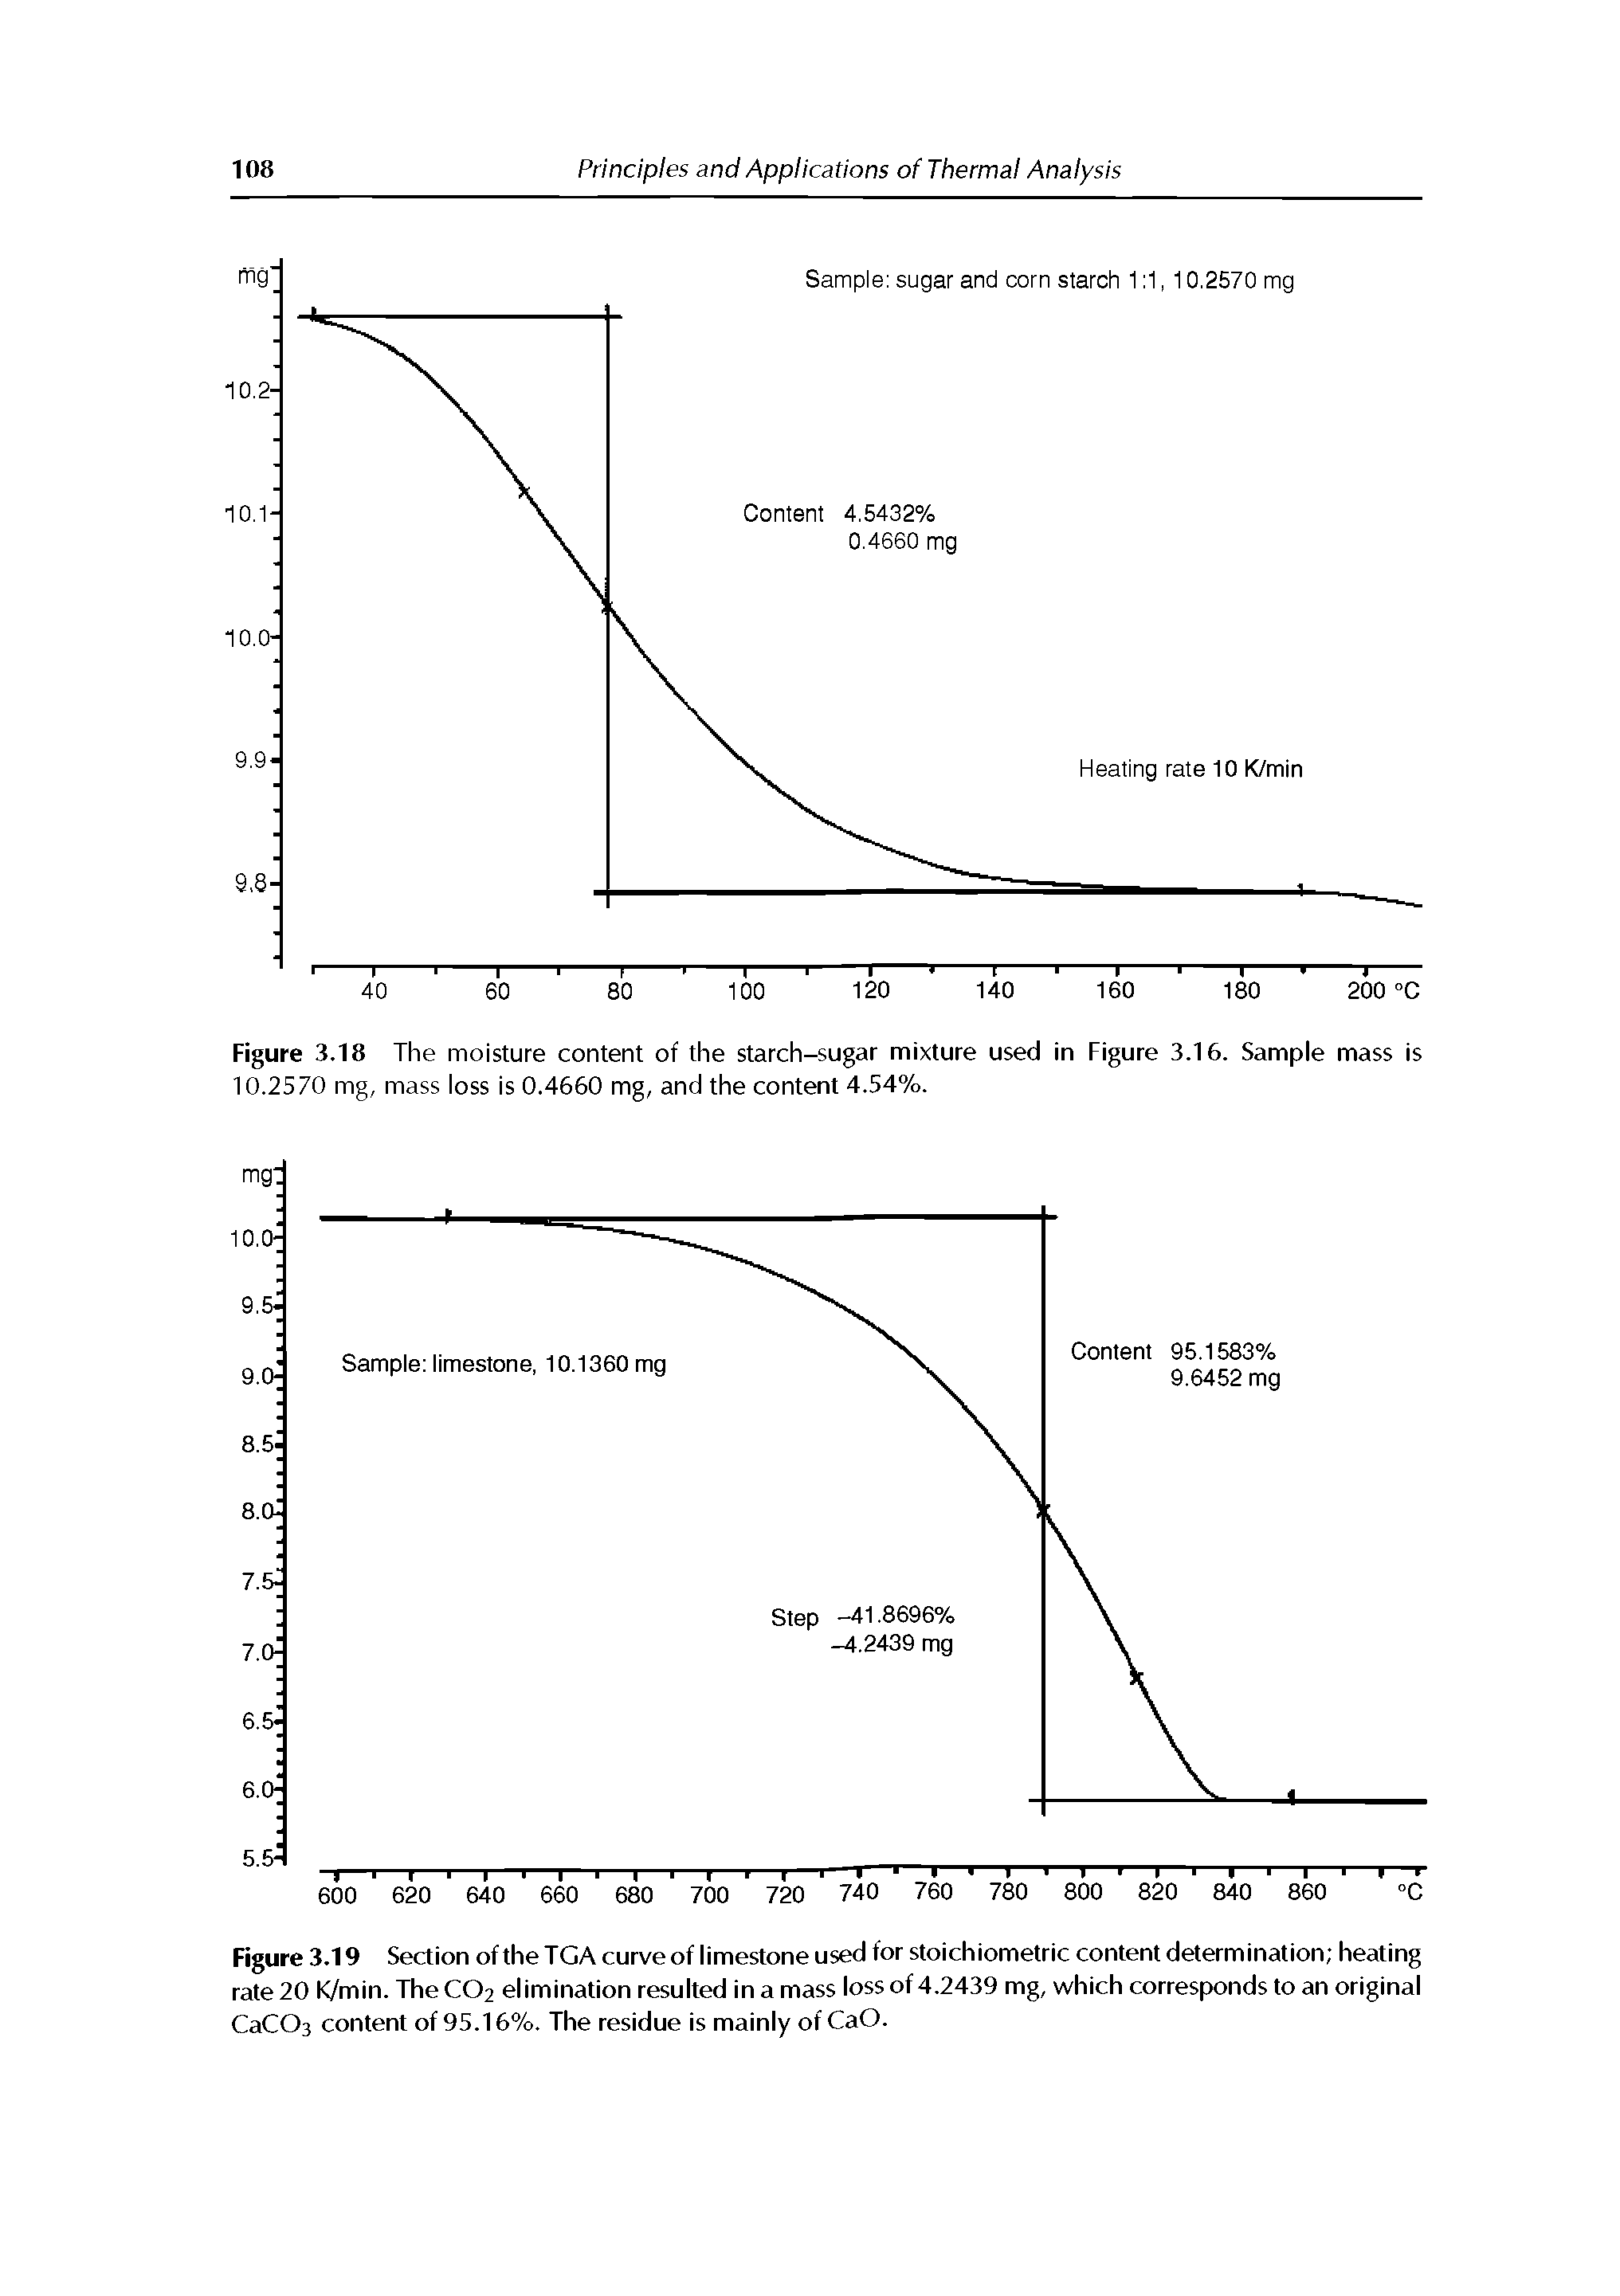 Figure 3.19 Section oftheTGA curve of limestone used for stoichiometric content determination heating rate 20 K/min. The CO2 elimination resulted in a mass loss of 4.2439 mg, which corresponds to an original CaCOs content of 95.16%. The residue is mainly of CaO.